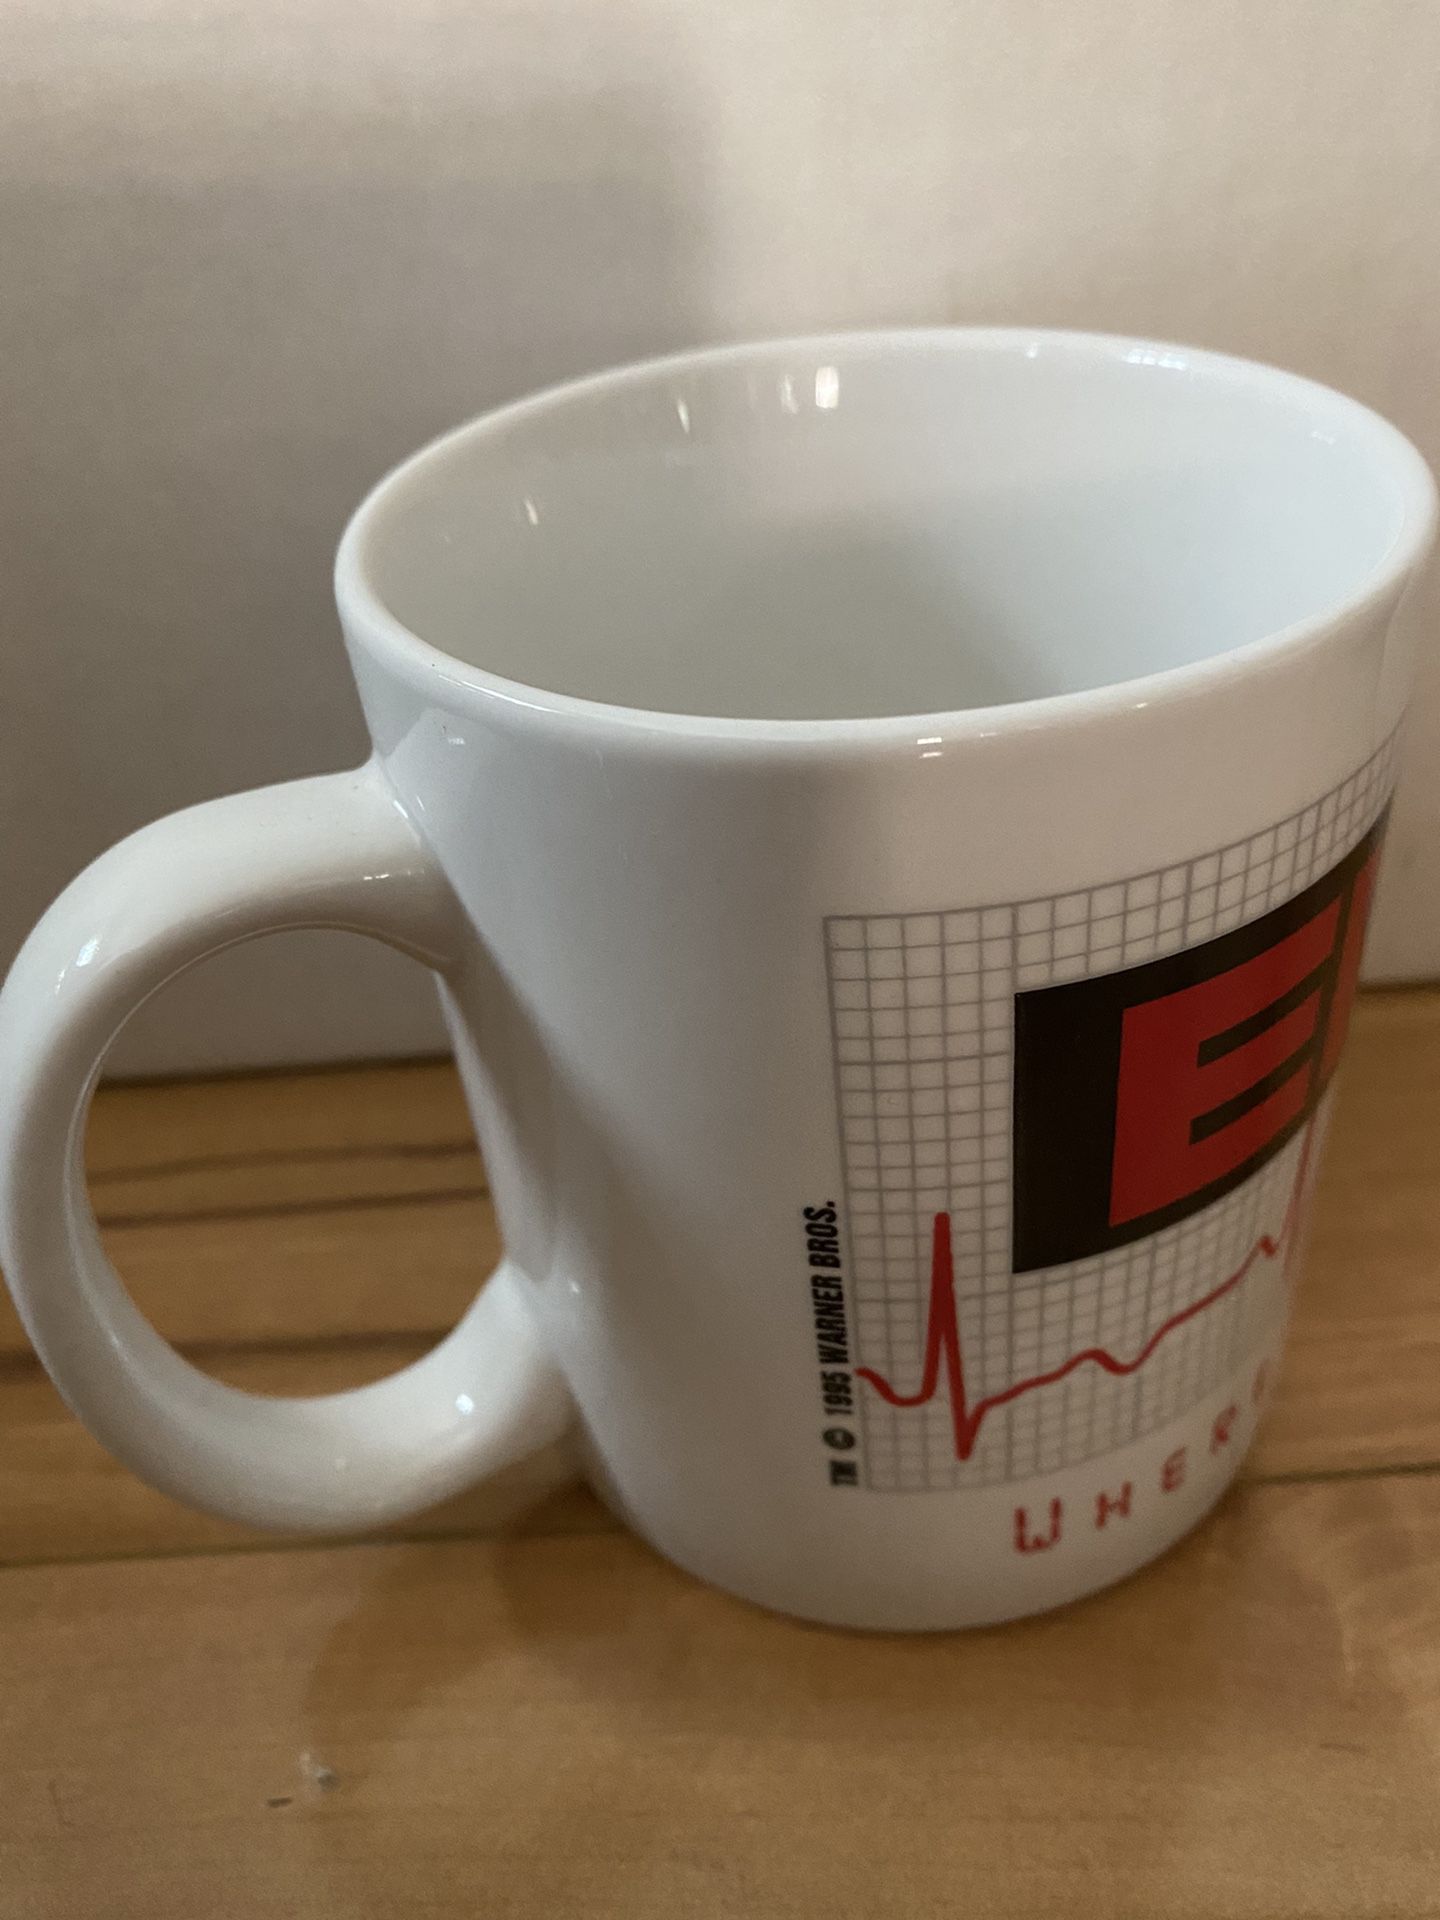 ER TV Show Coffee Cup Mug "Where Everything Is Stat" Warner Bros 1995 Doctor